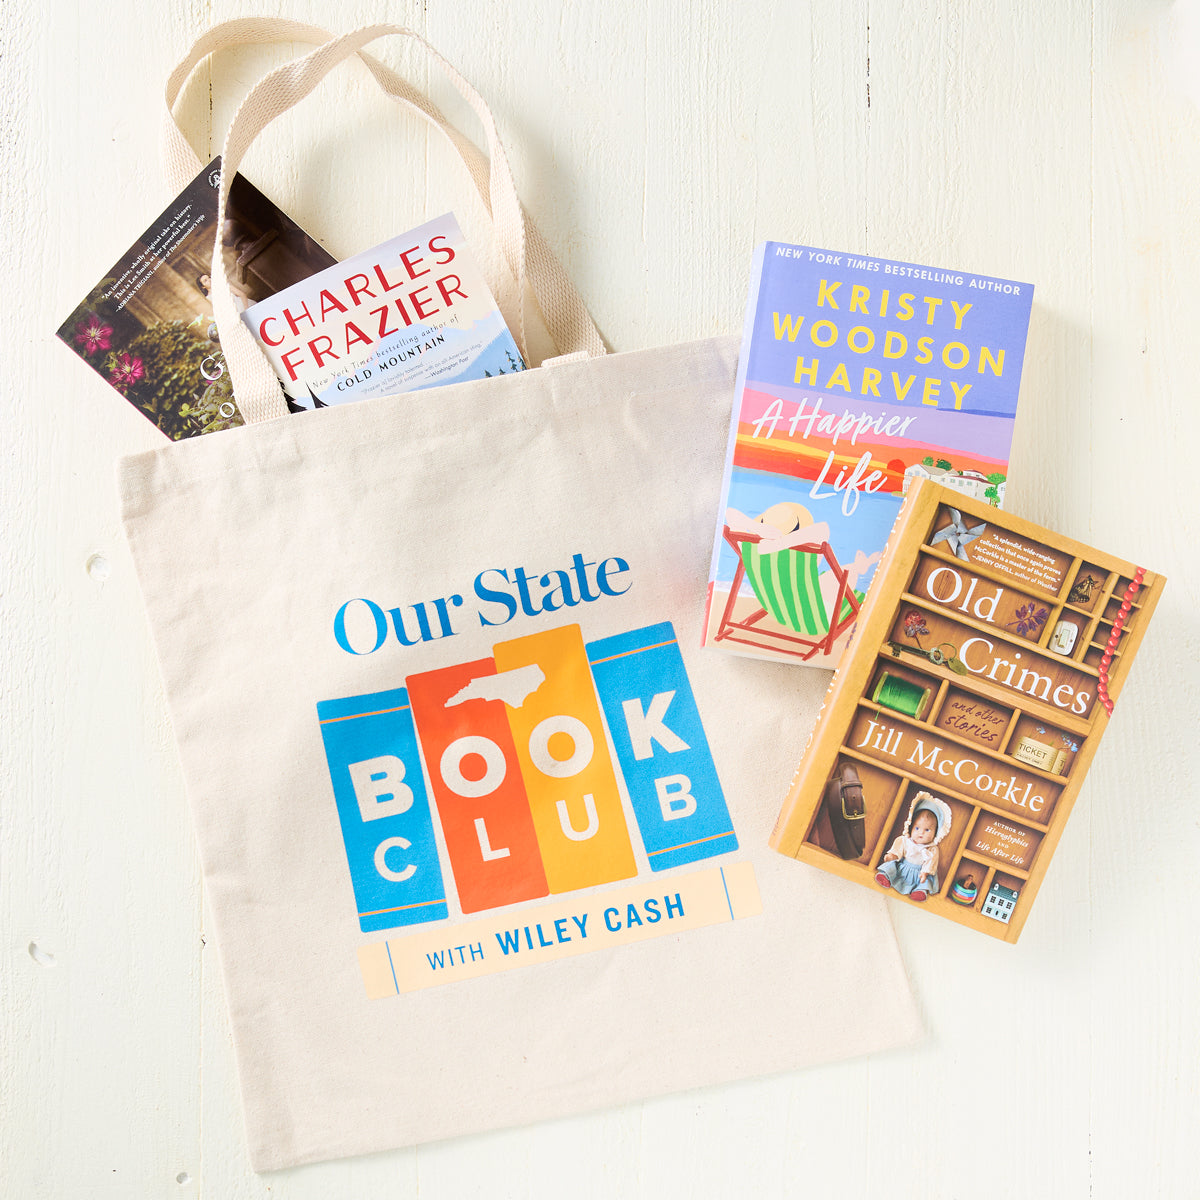 Our State Book Club Tote Bag